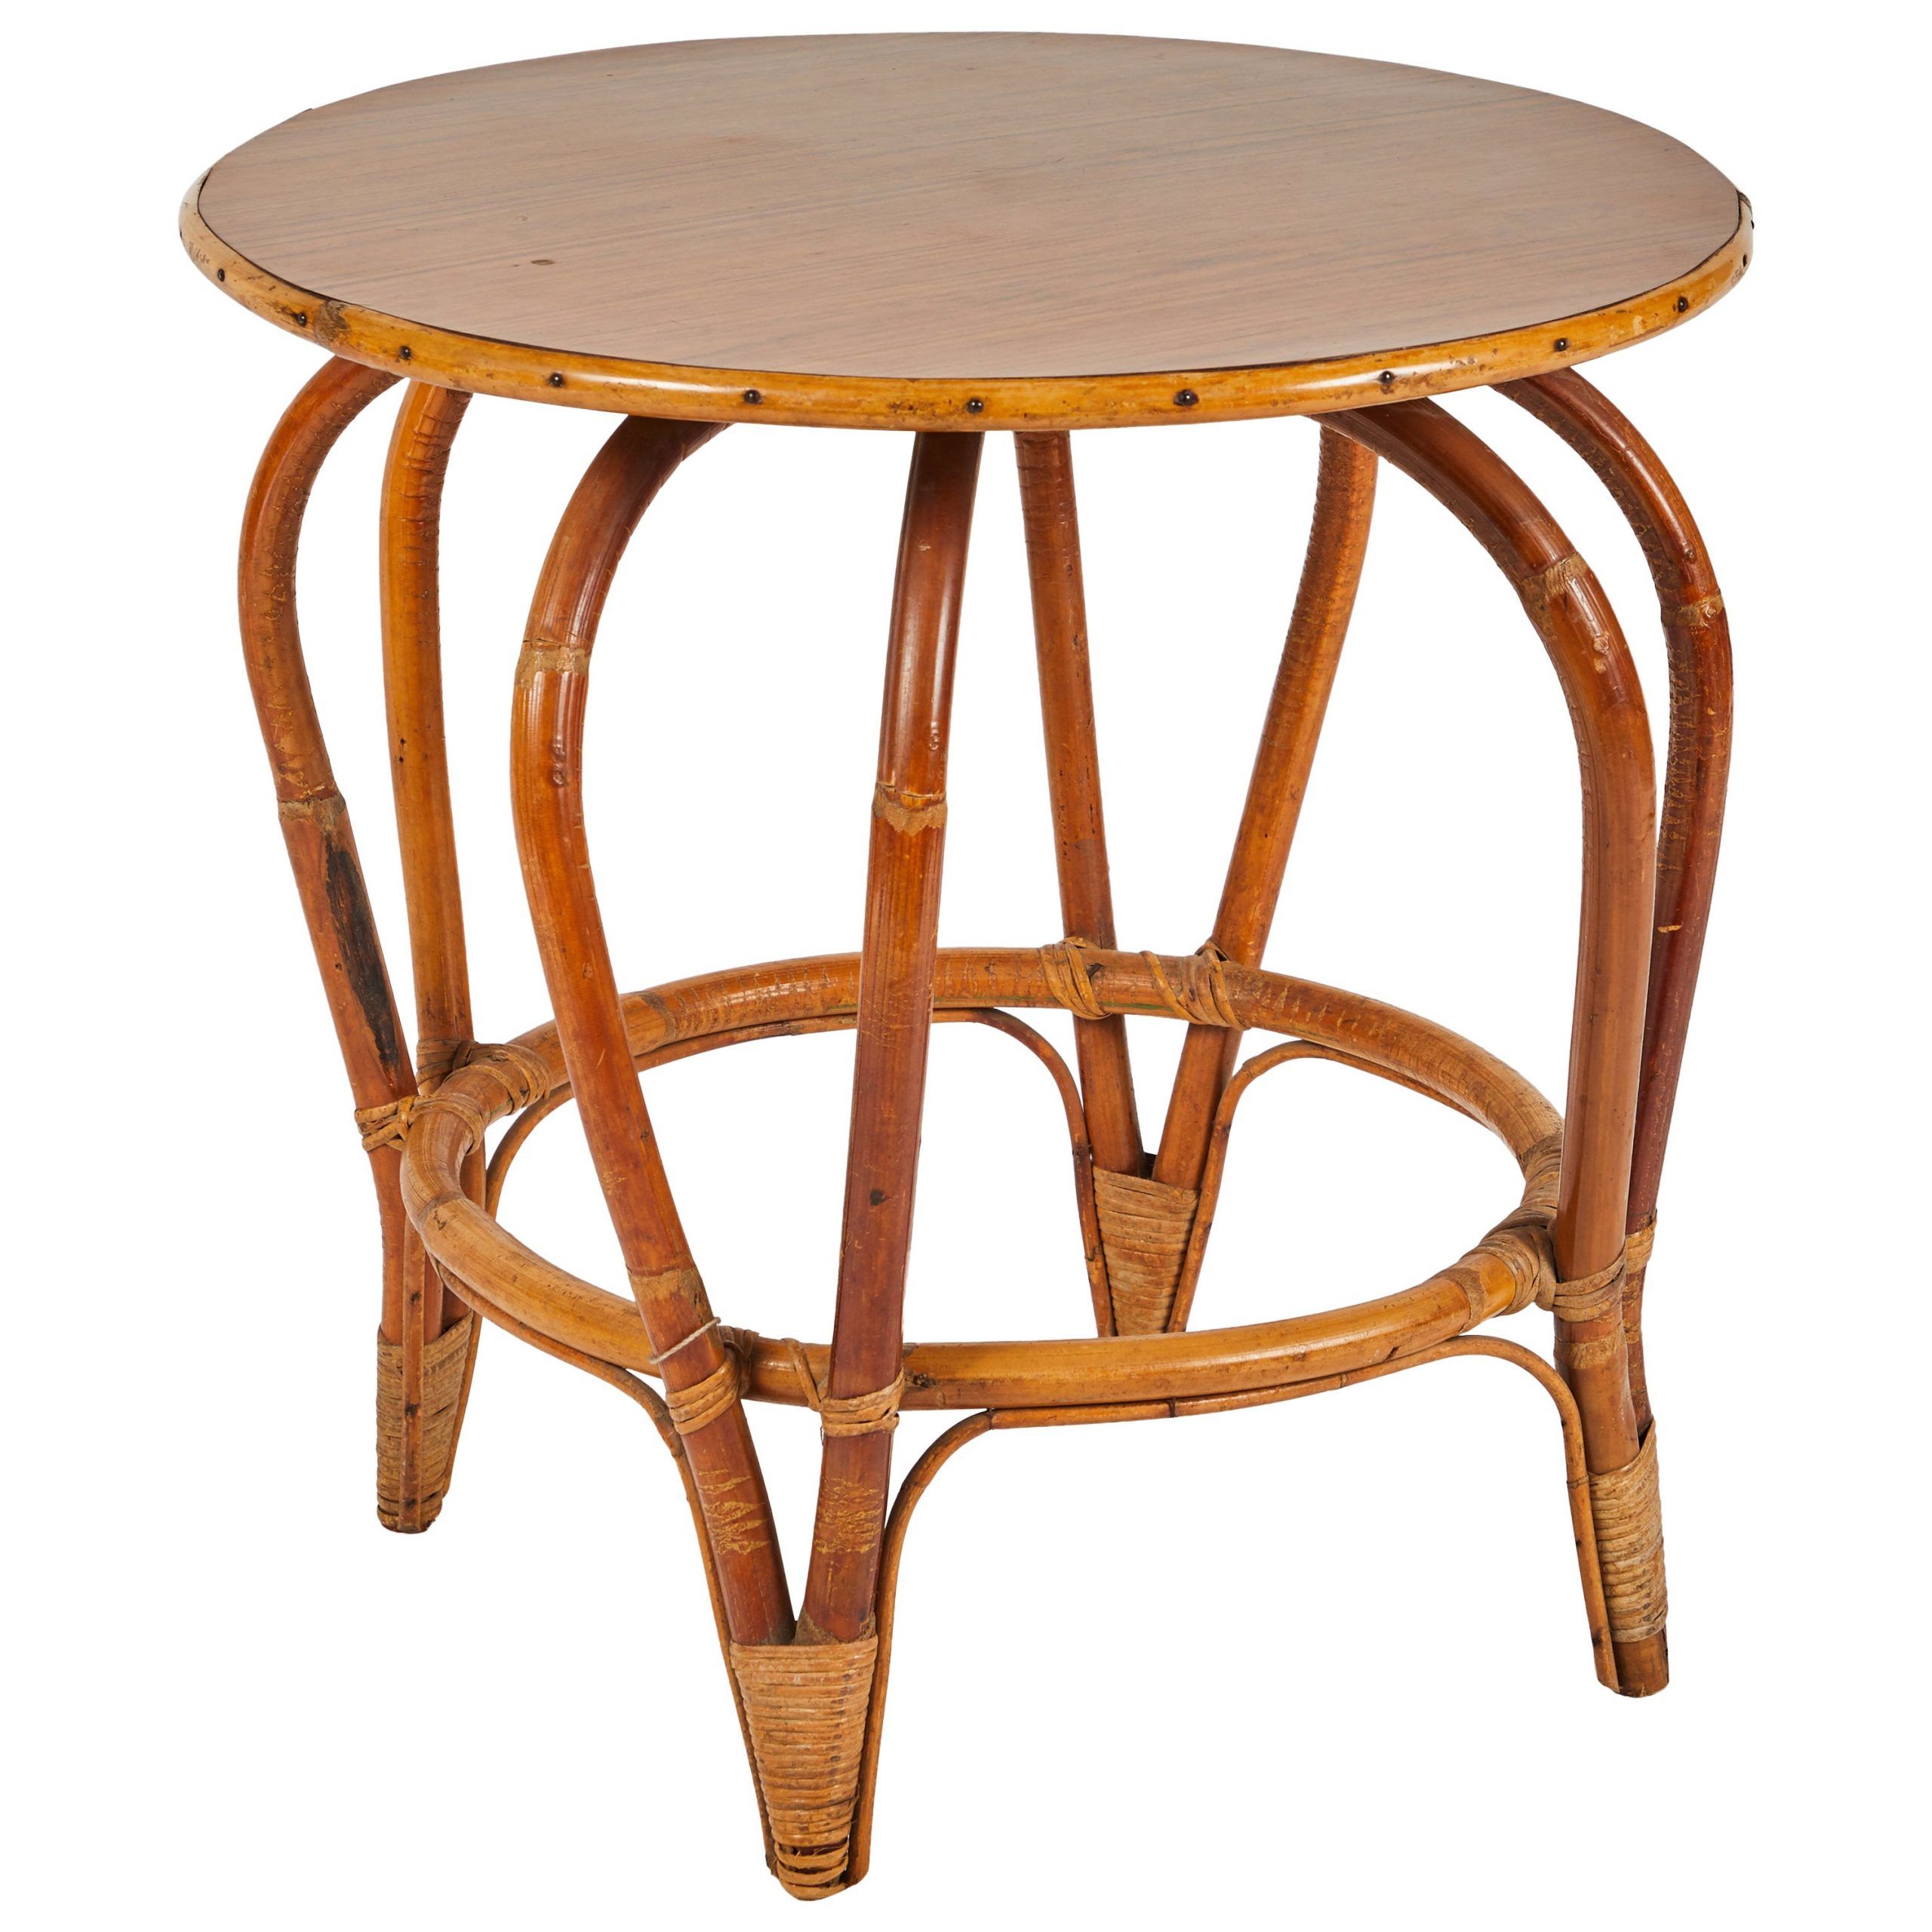 Vintage Round Rattan Drum Shape Coffee Or End Table With Regarding Most Up To Date Light Natural Drum Coffee Tables (View 16 of 20)